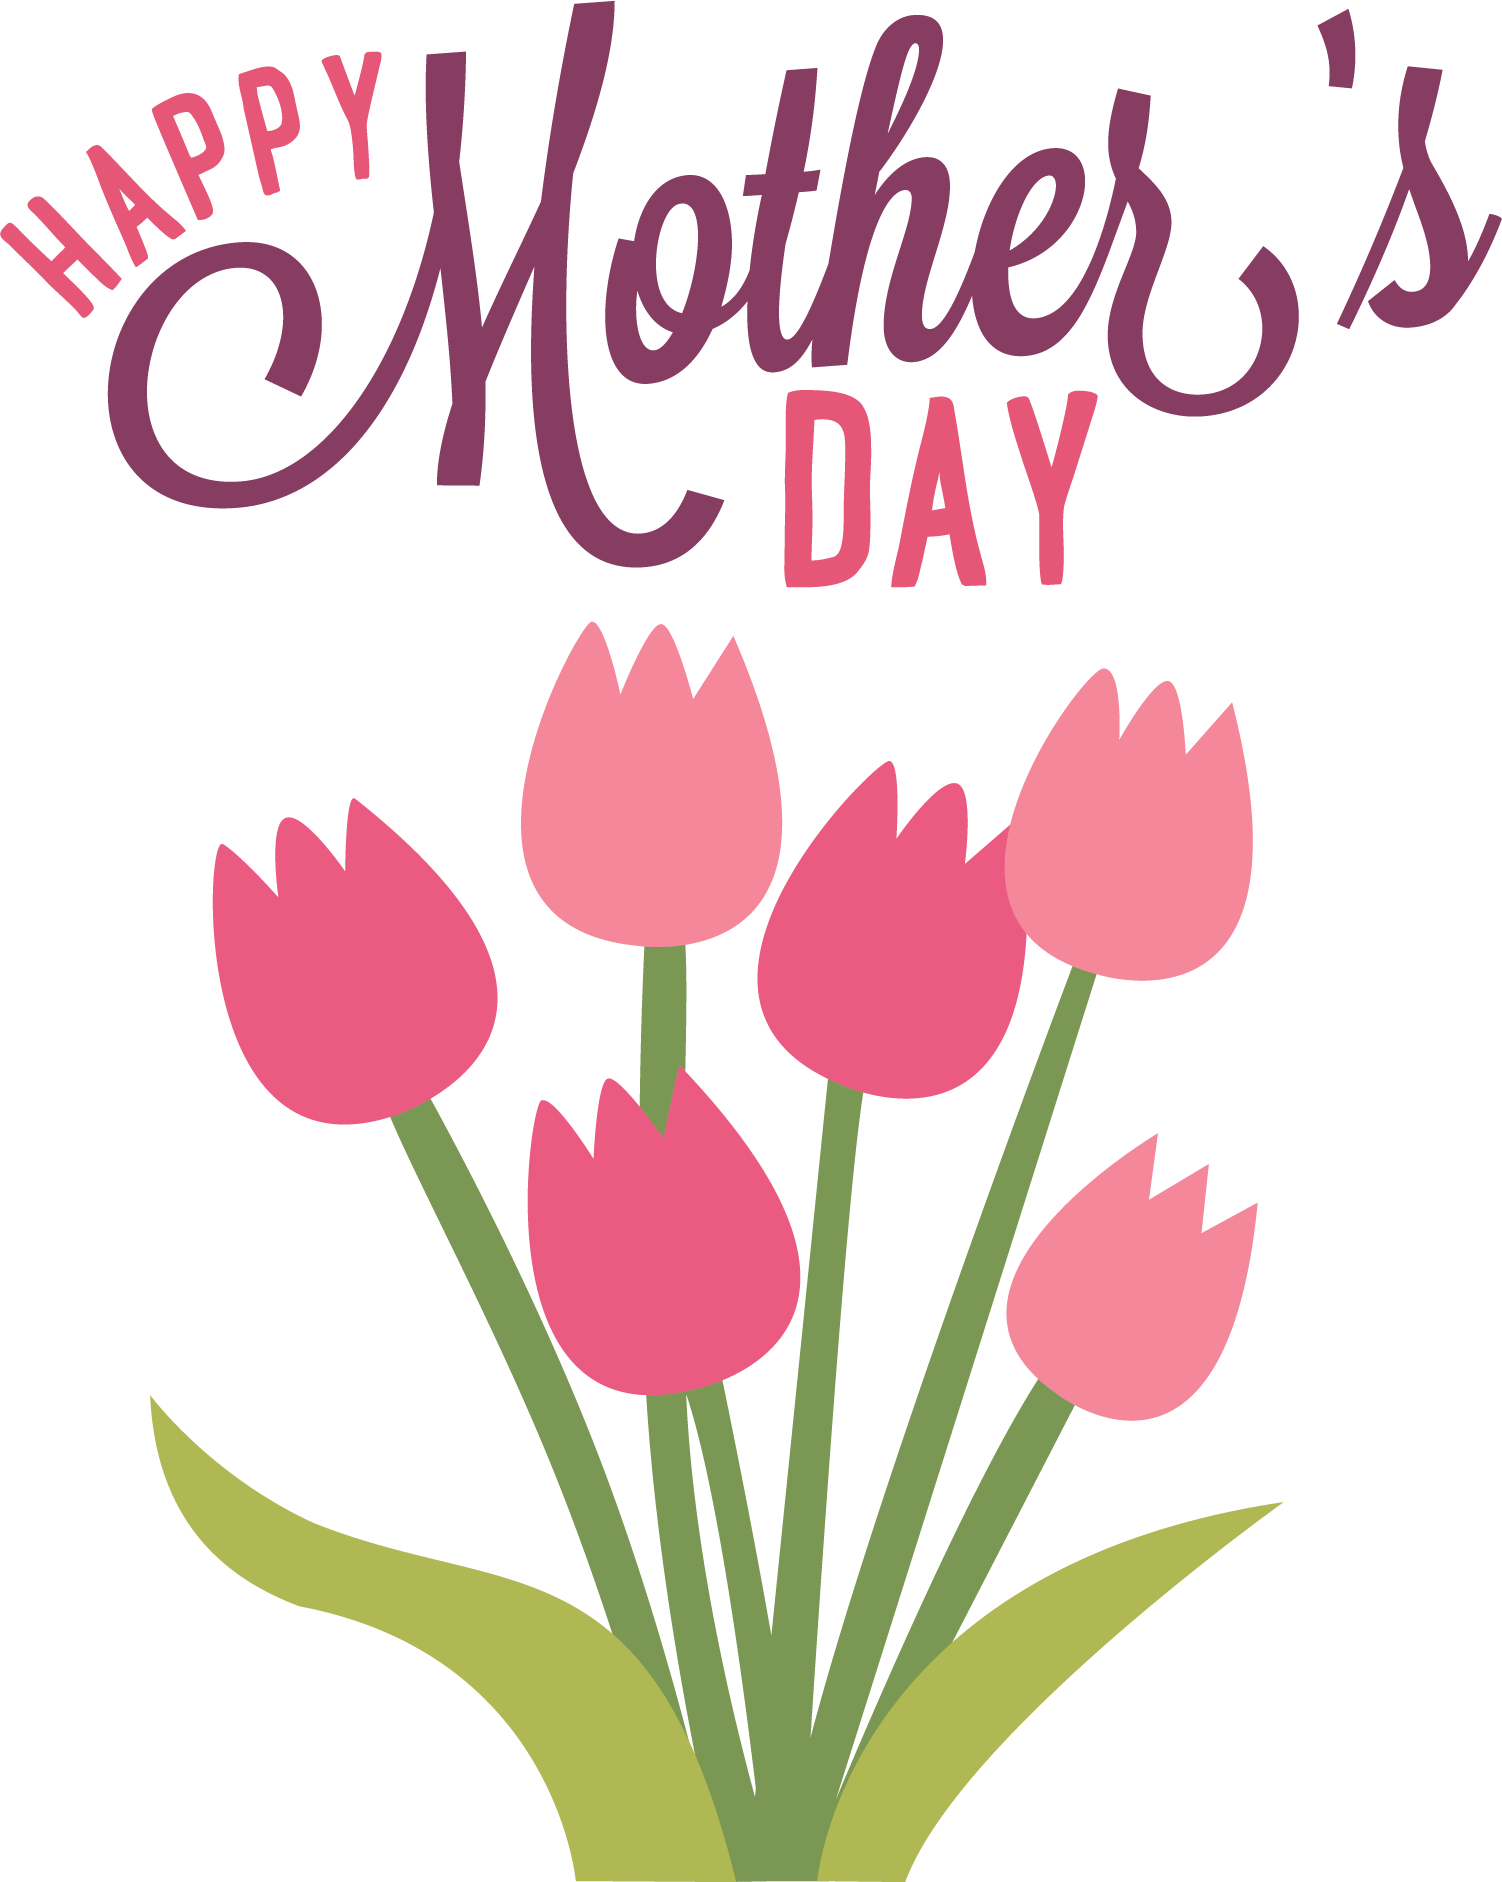 clip art mother's day free - photo #32